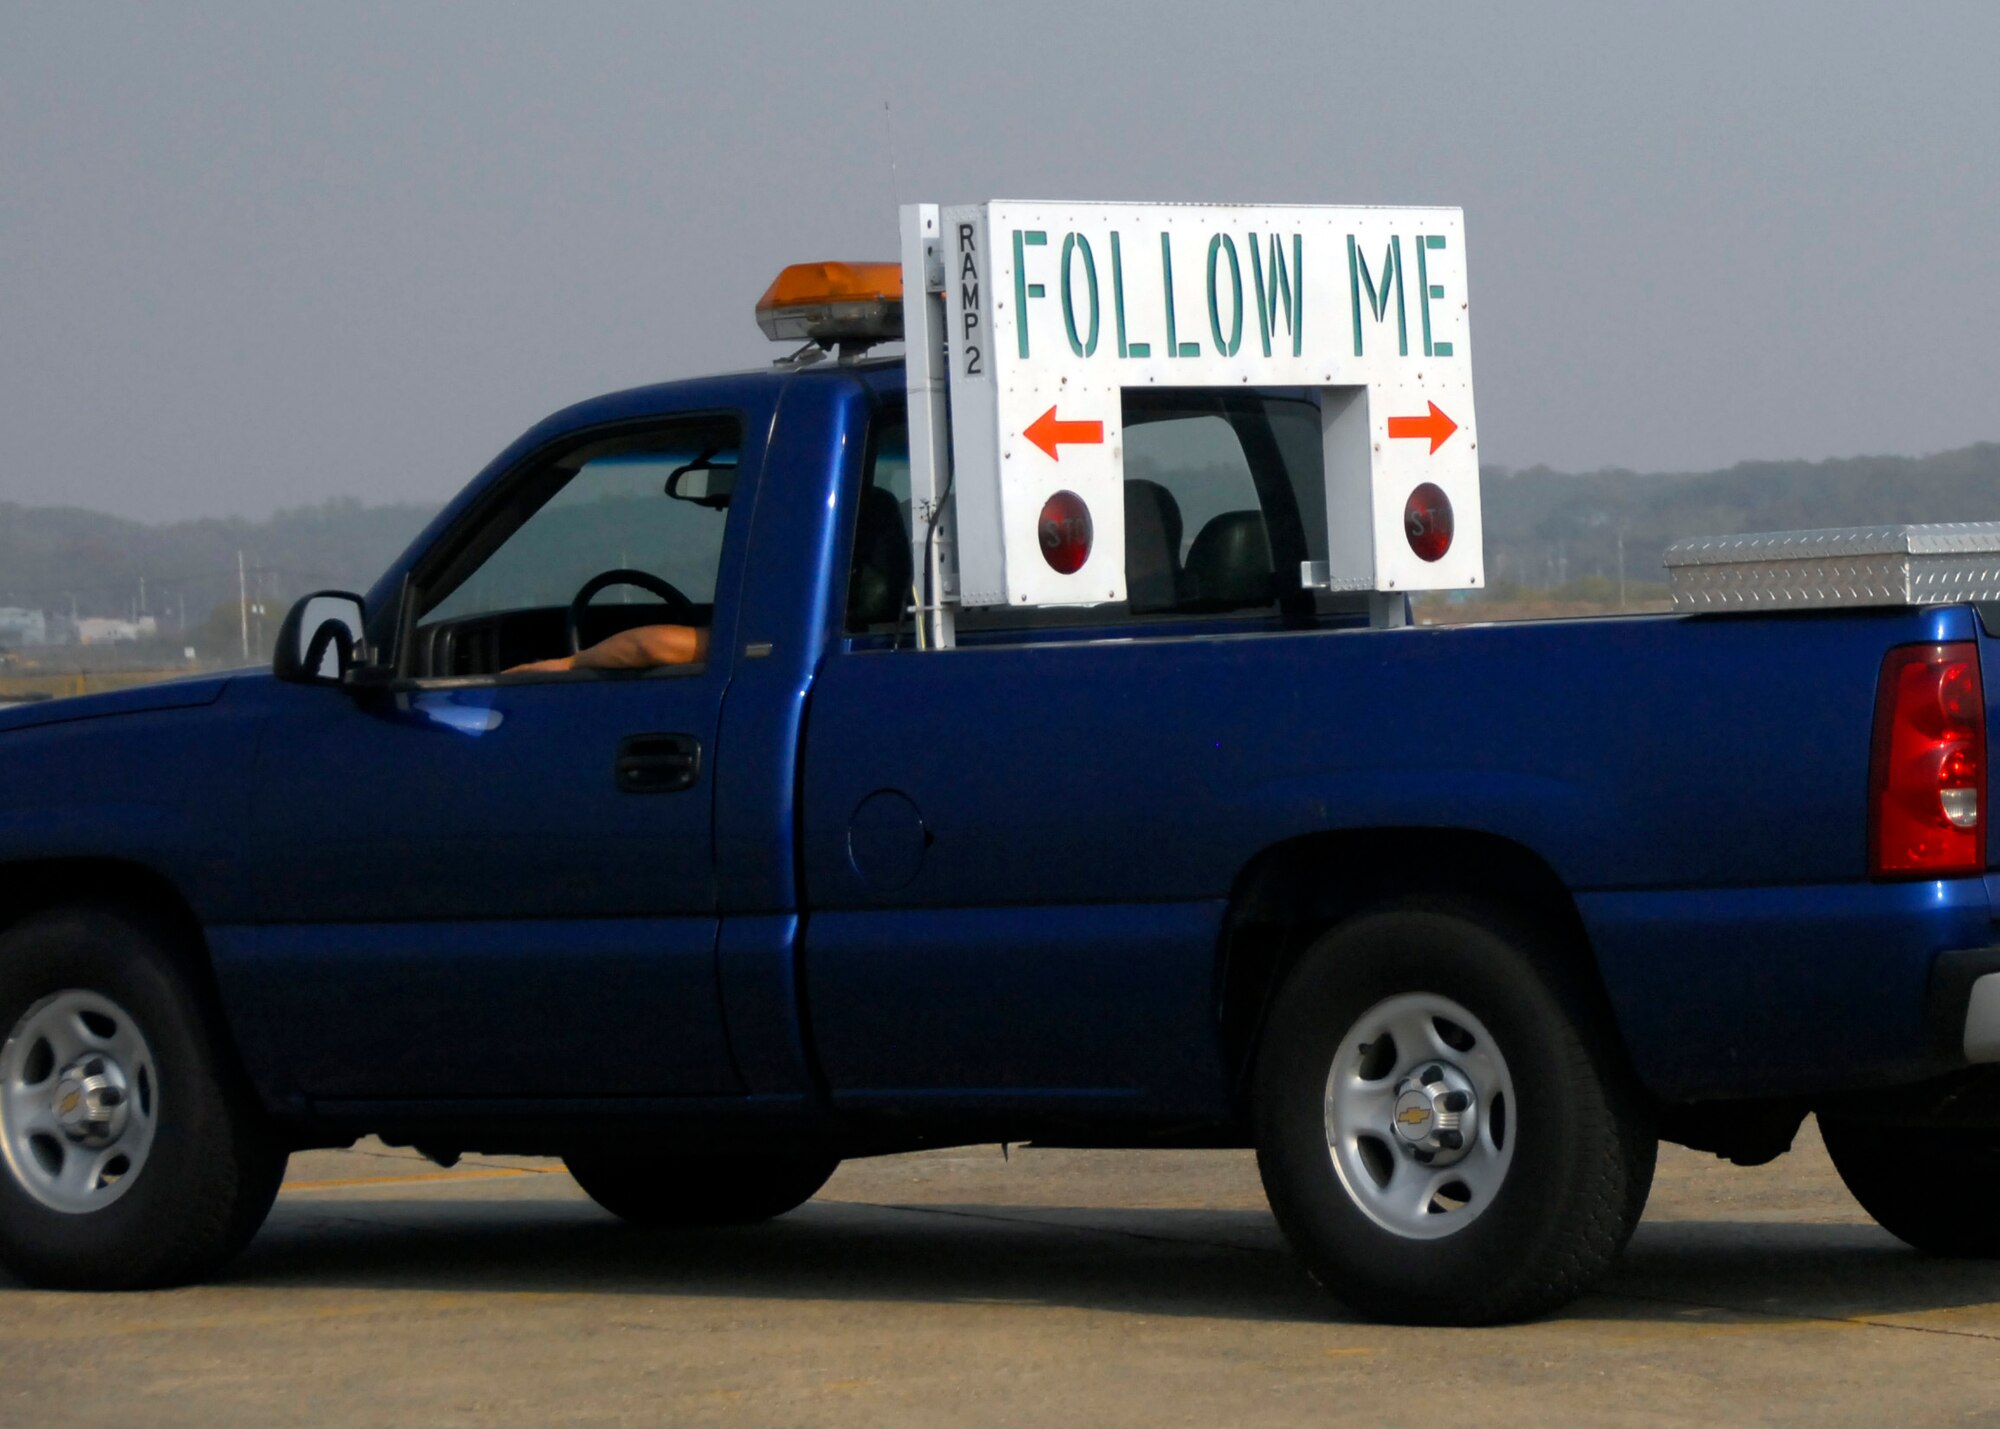 Two Transient Alert team members await a visiting aircraft on the flightline at Osan AB. The “Follow Me” sign on back of a pickup truck is the hallmark of the Transient Alert. (U.S. Air Force photos/ 1st Lt. Sara Greco)